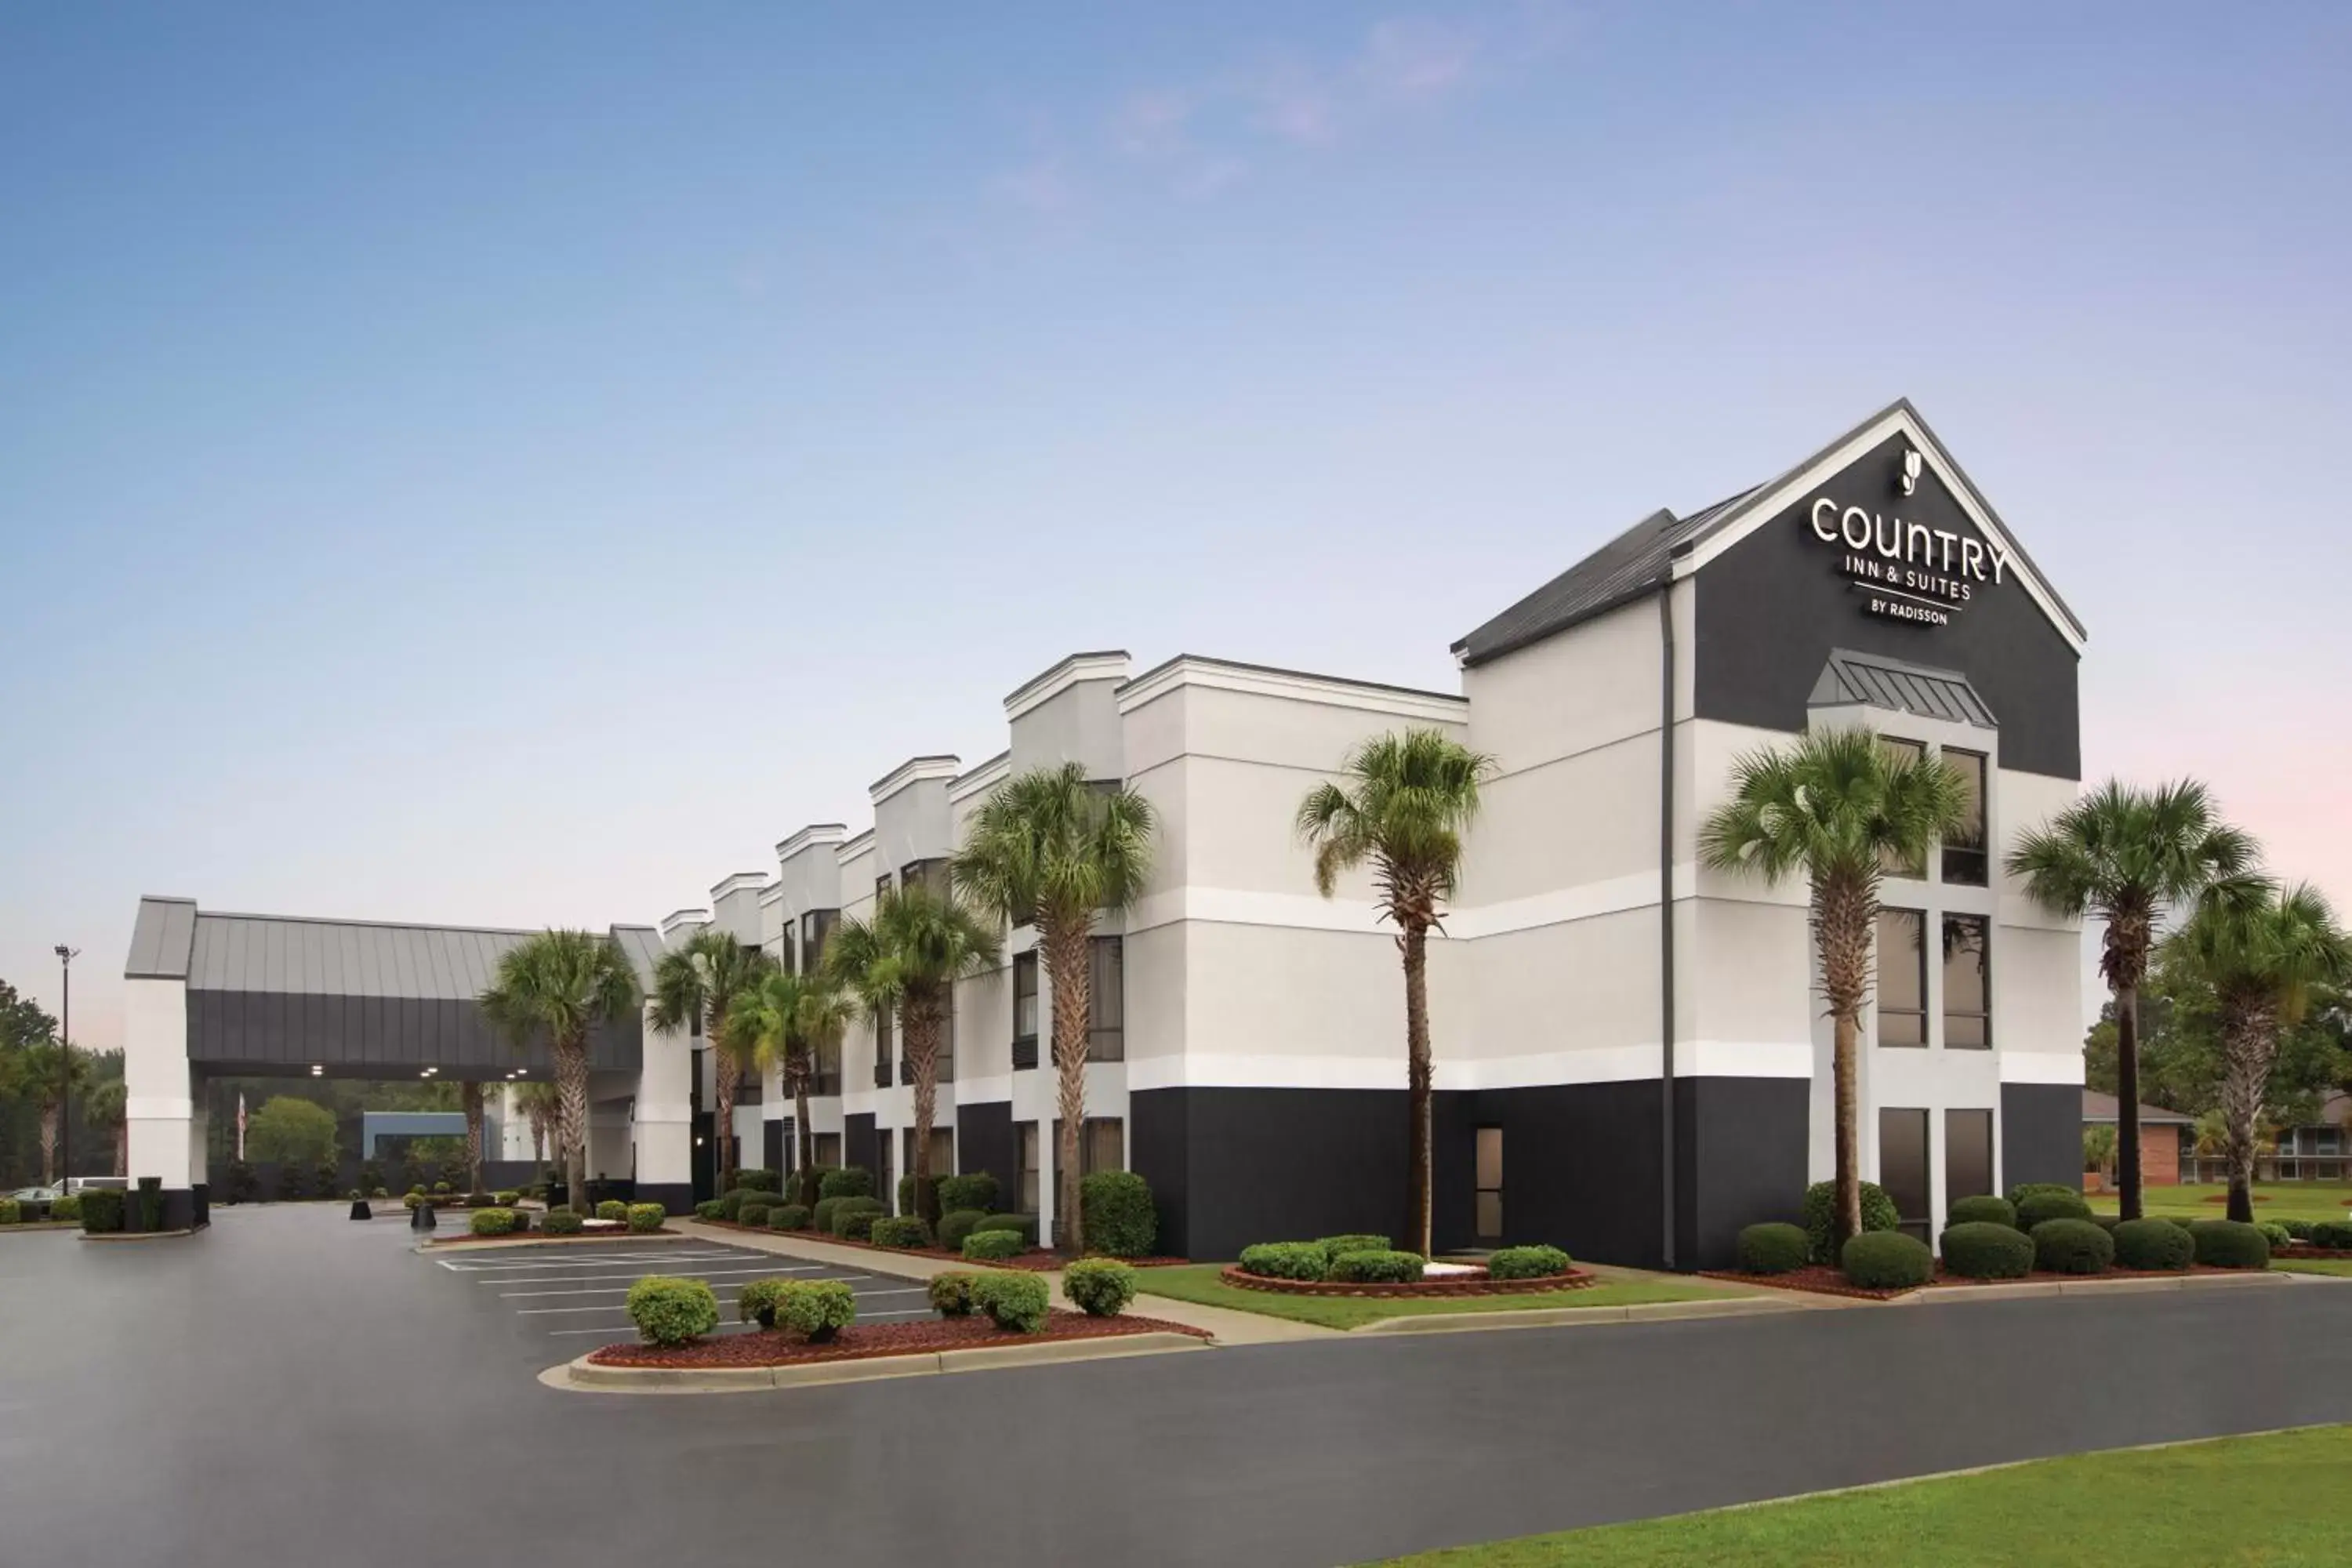 Facade/entrance, Property Building in Country Inn & Suites by Radisson, Florence, SC